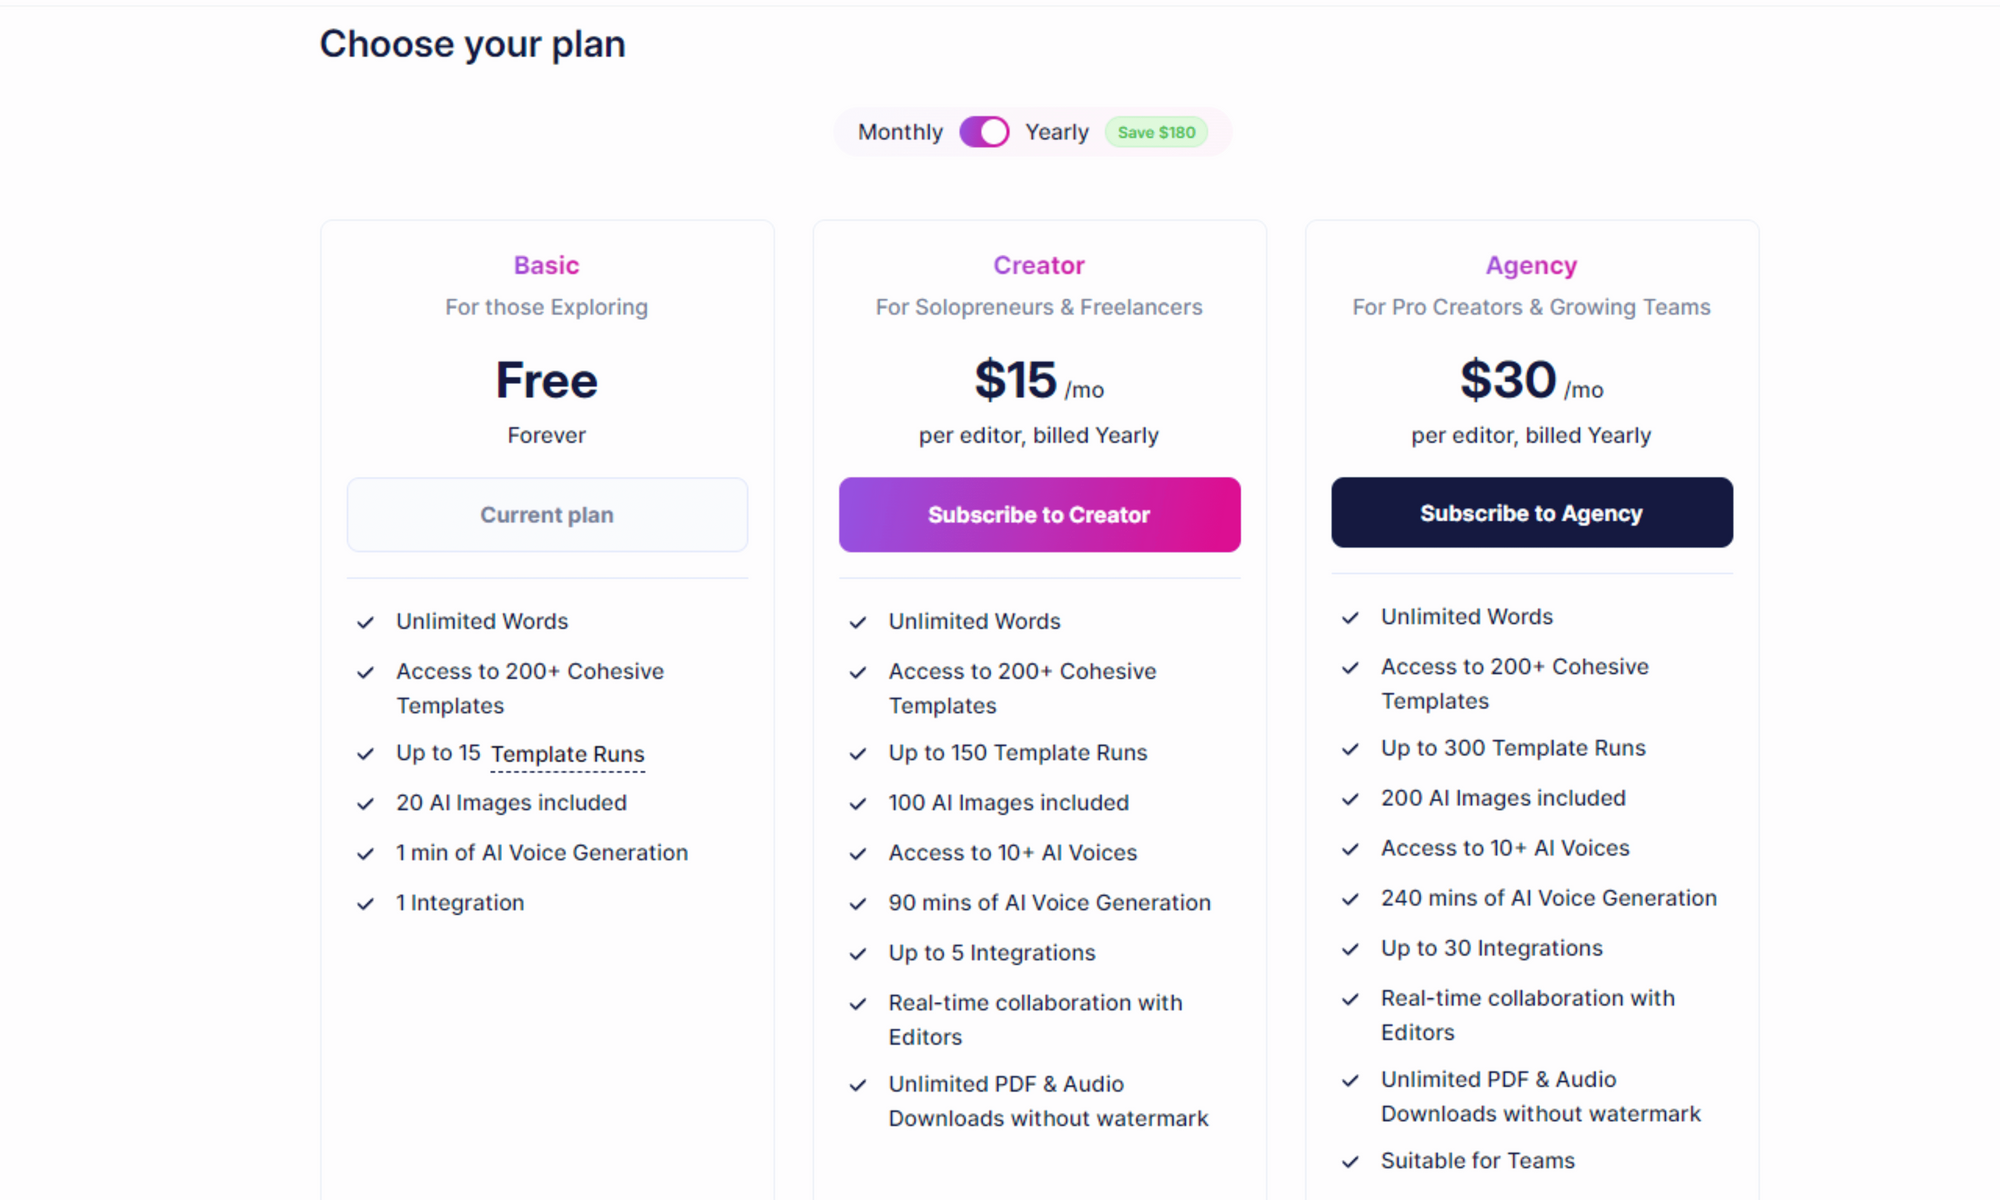 Overview of different pricing plans offered by Cohesive AI.